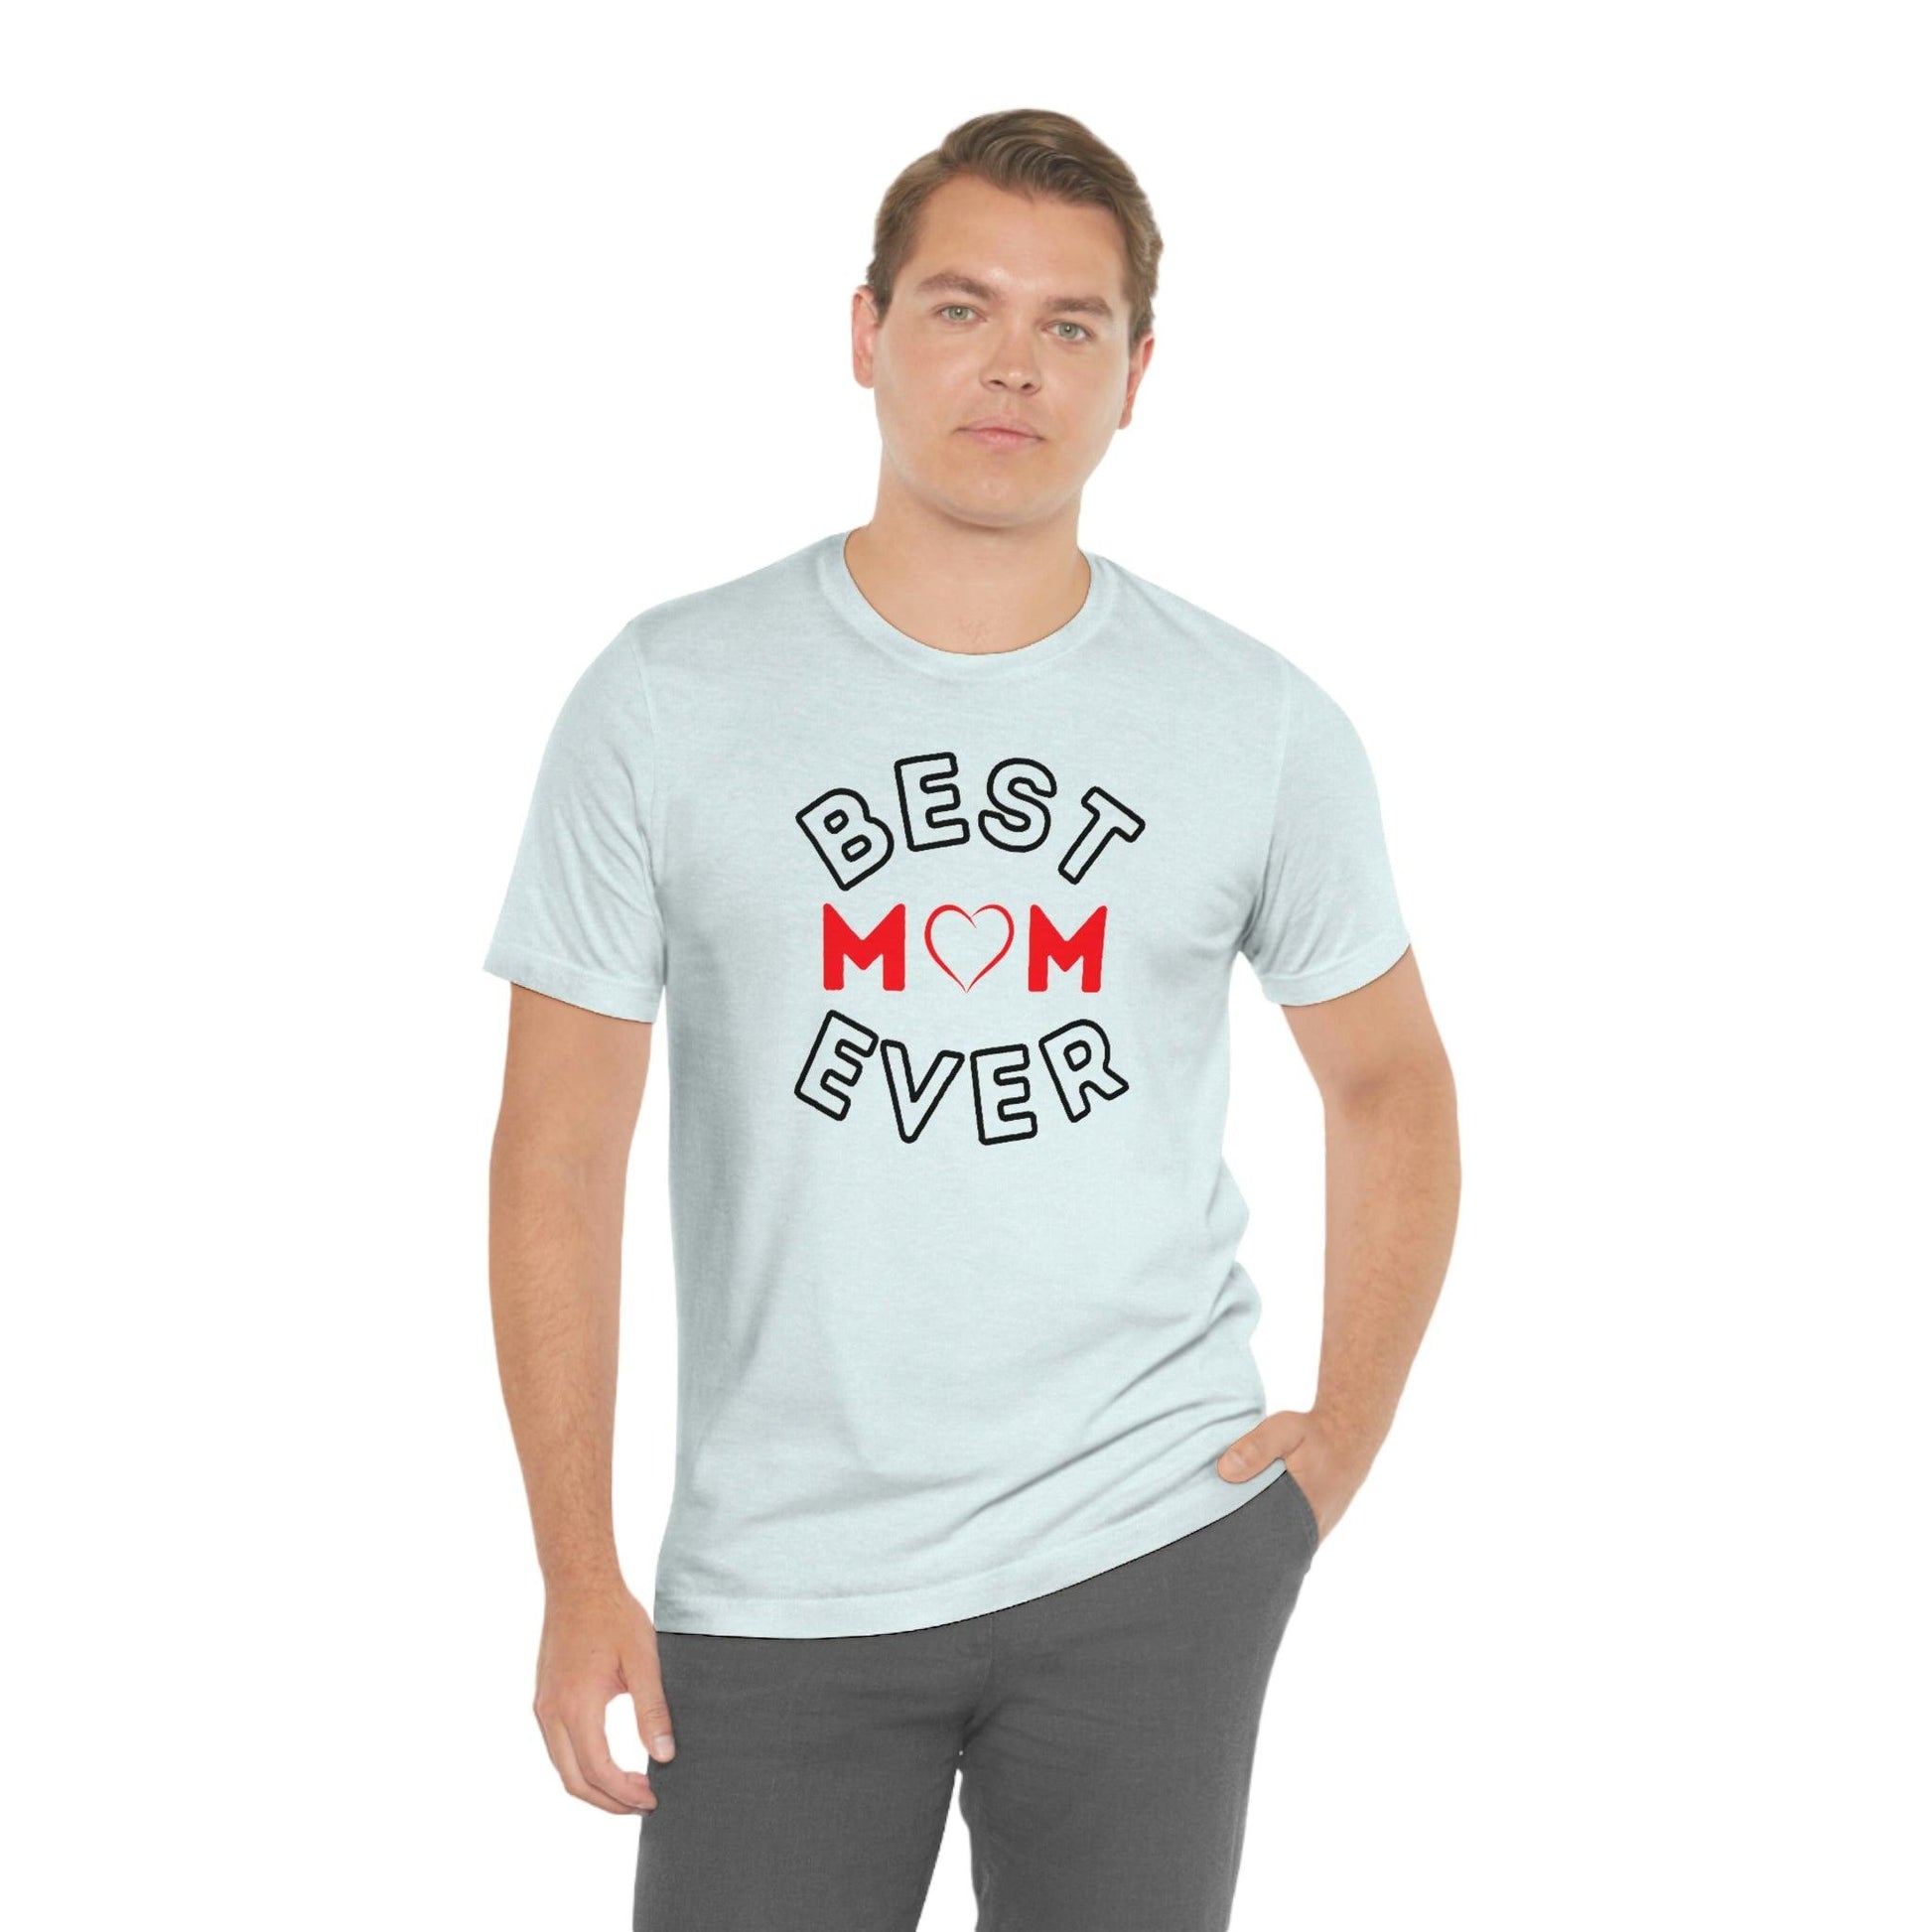 Best Mom Ever Shirt, Mothers day shirt, gift for mom, Mom birthday gift, Mothers day t shirts, Mothers shirts, Best mothers day gifta - Giftsmojo